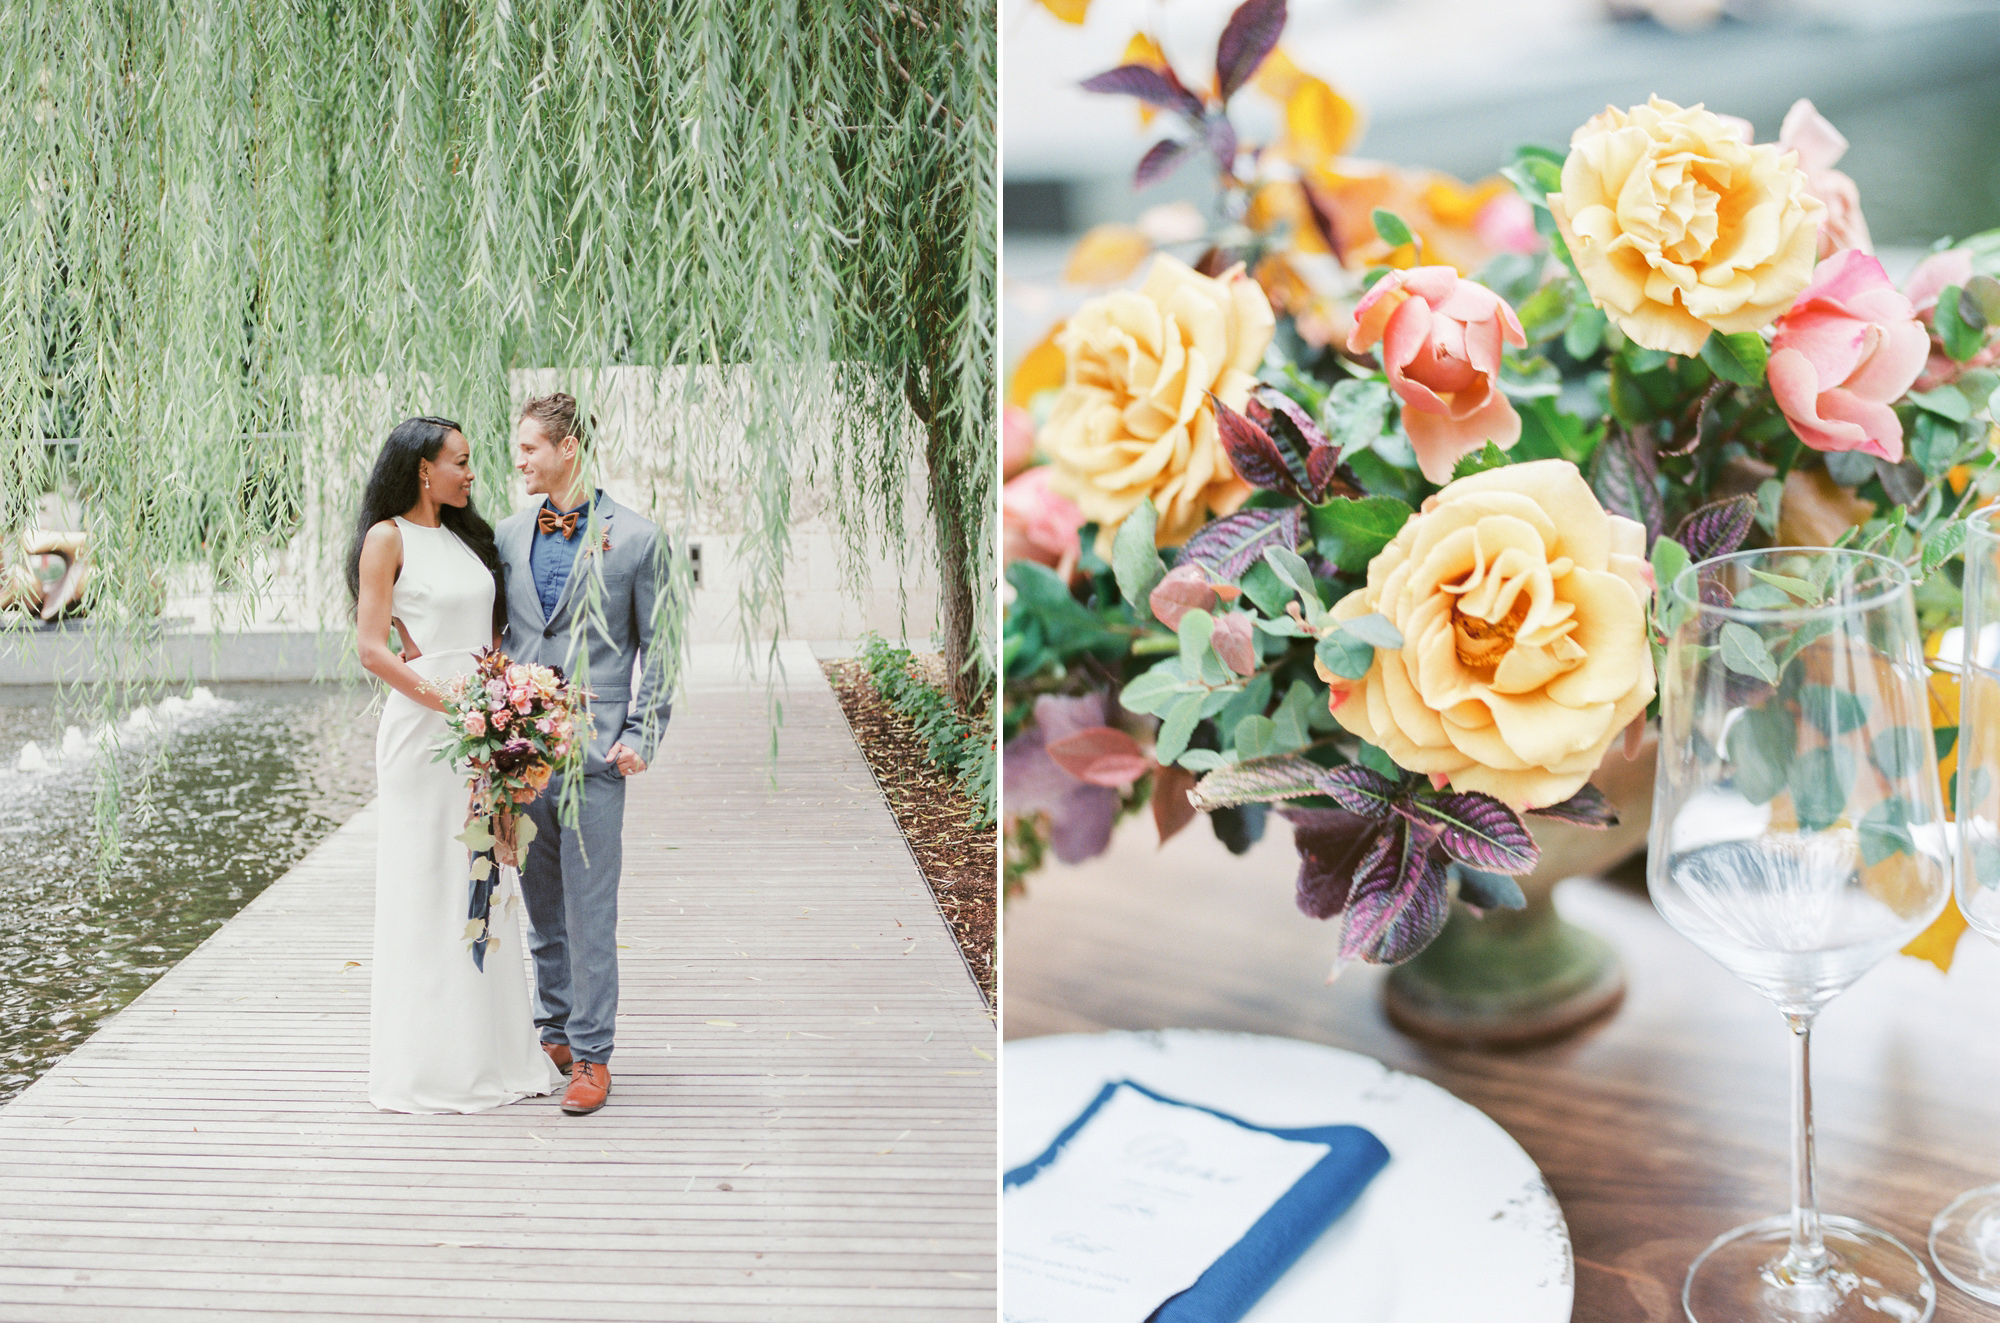 A modern stylish wedding at the Nasher Sculpture Center by Dallas wedding photographer Tenth & Grace